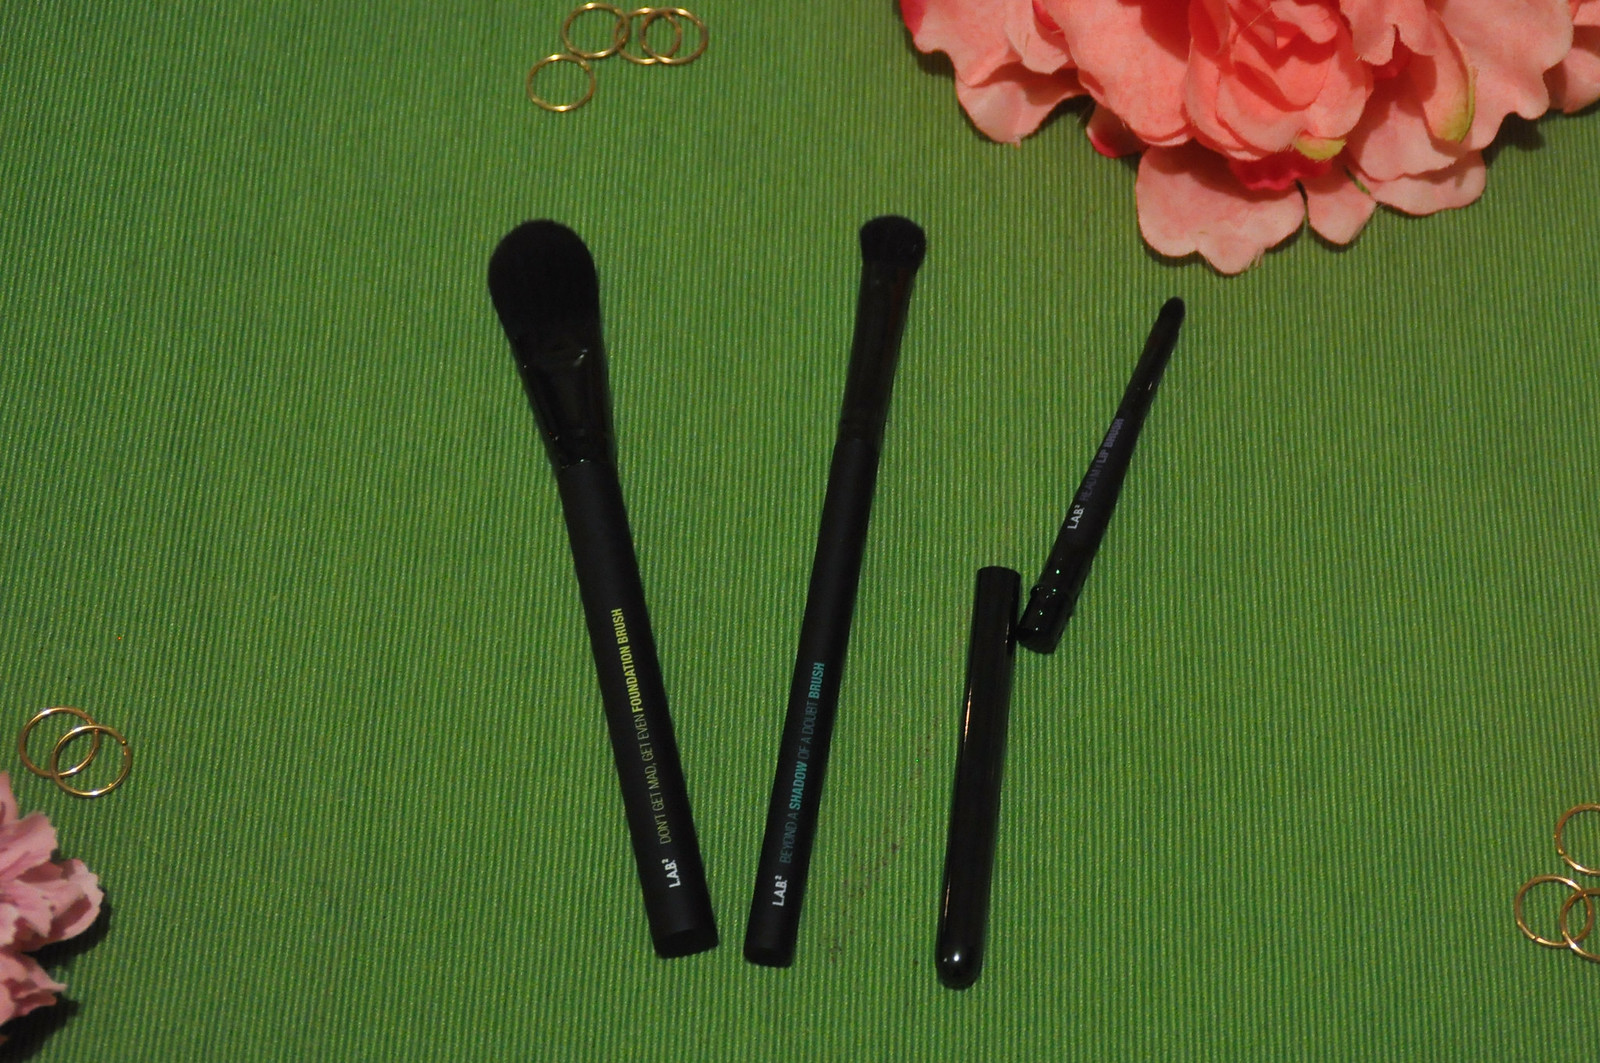 L.A.B 2 brush review